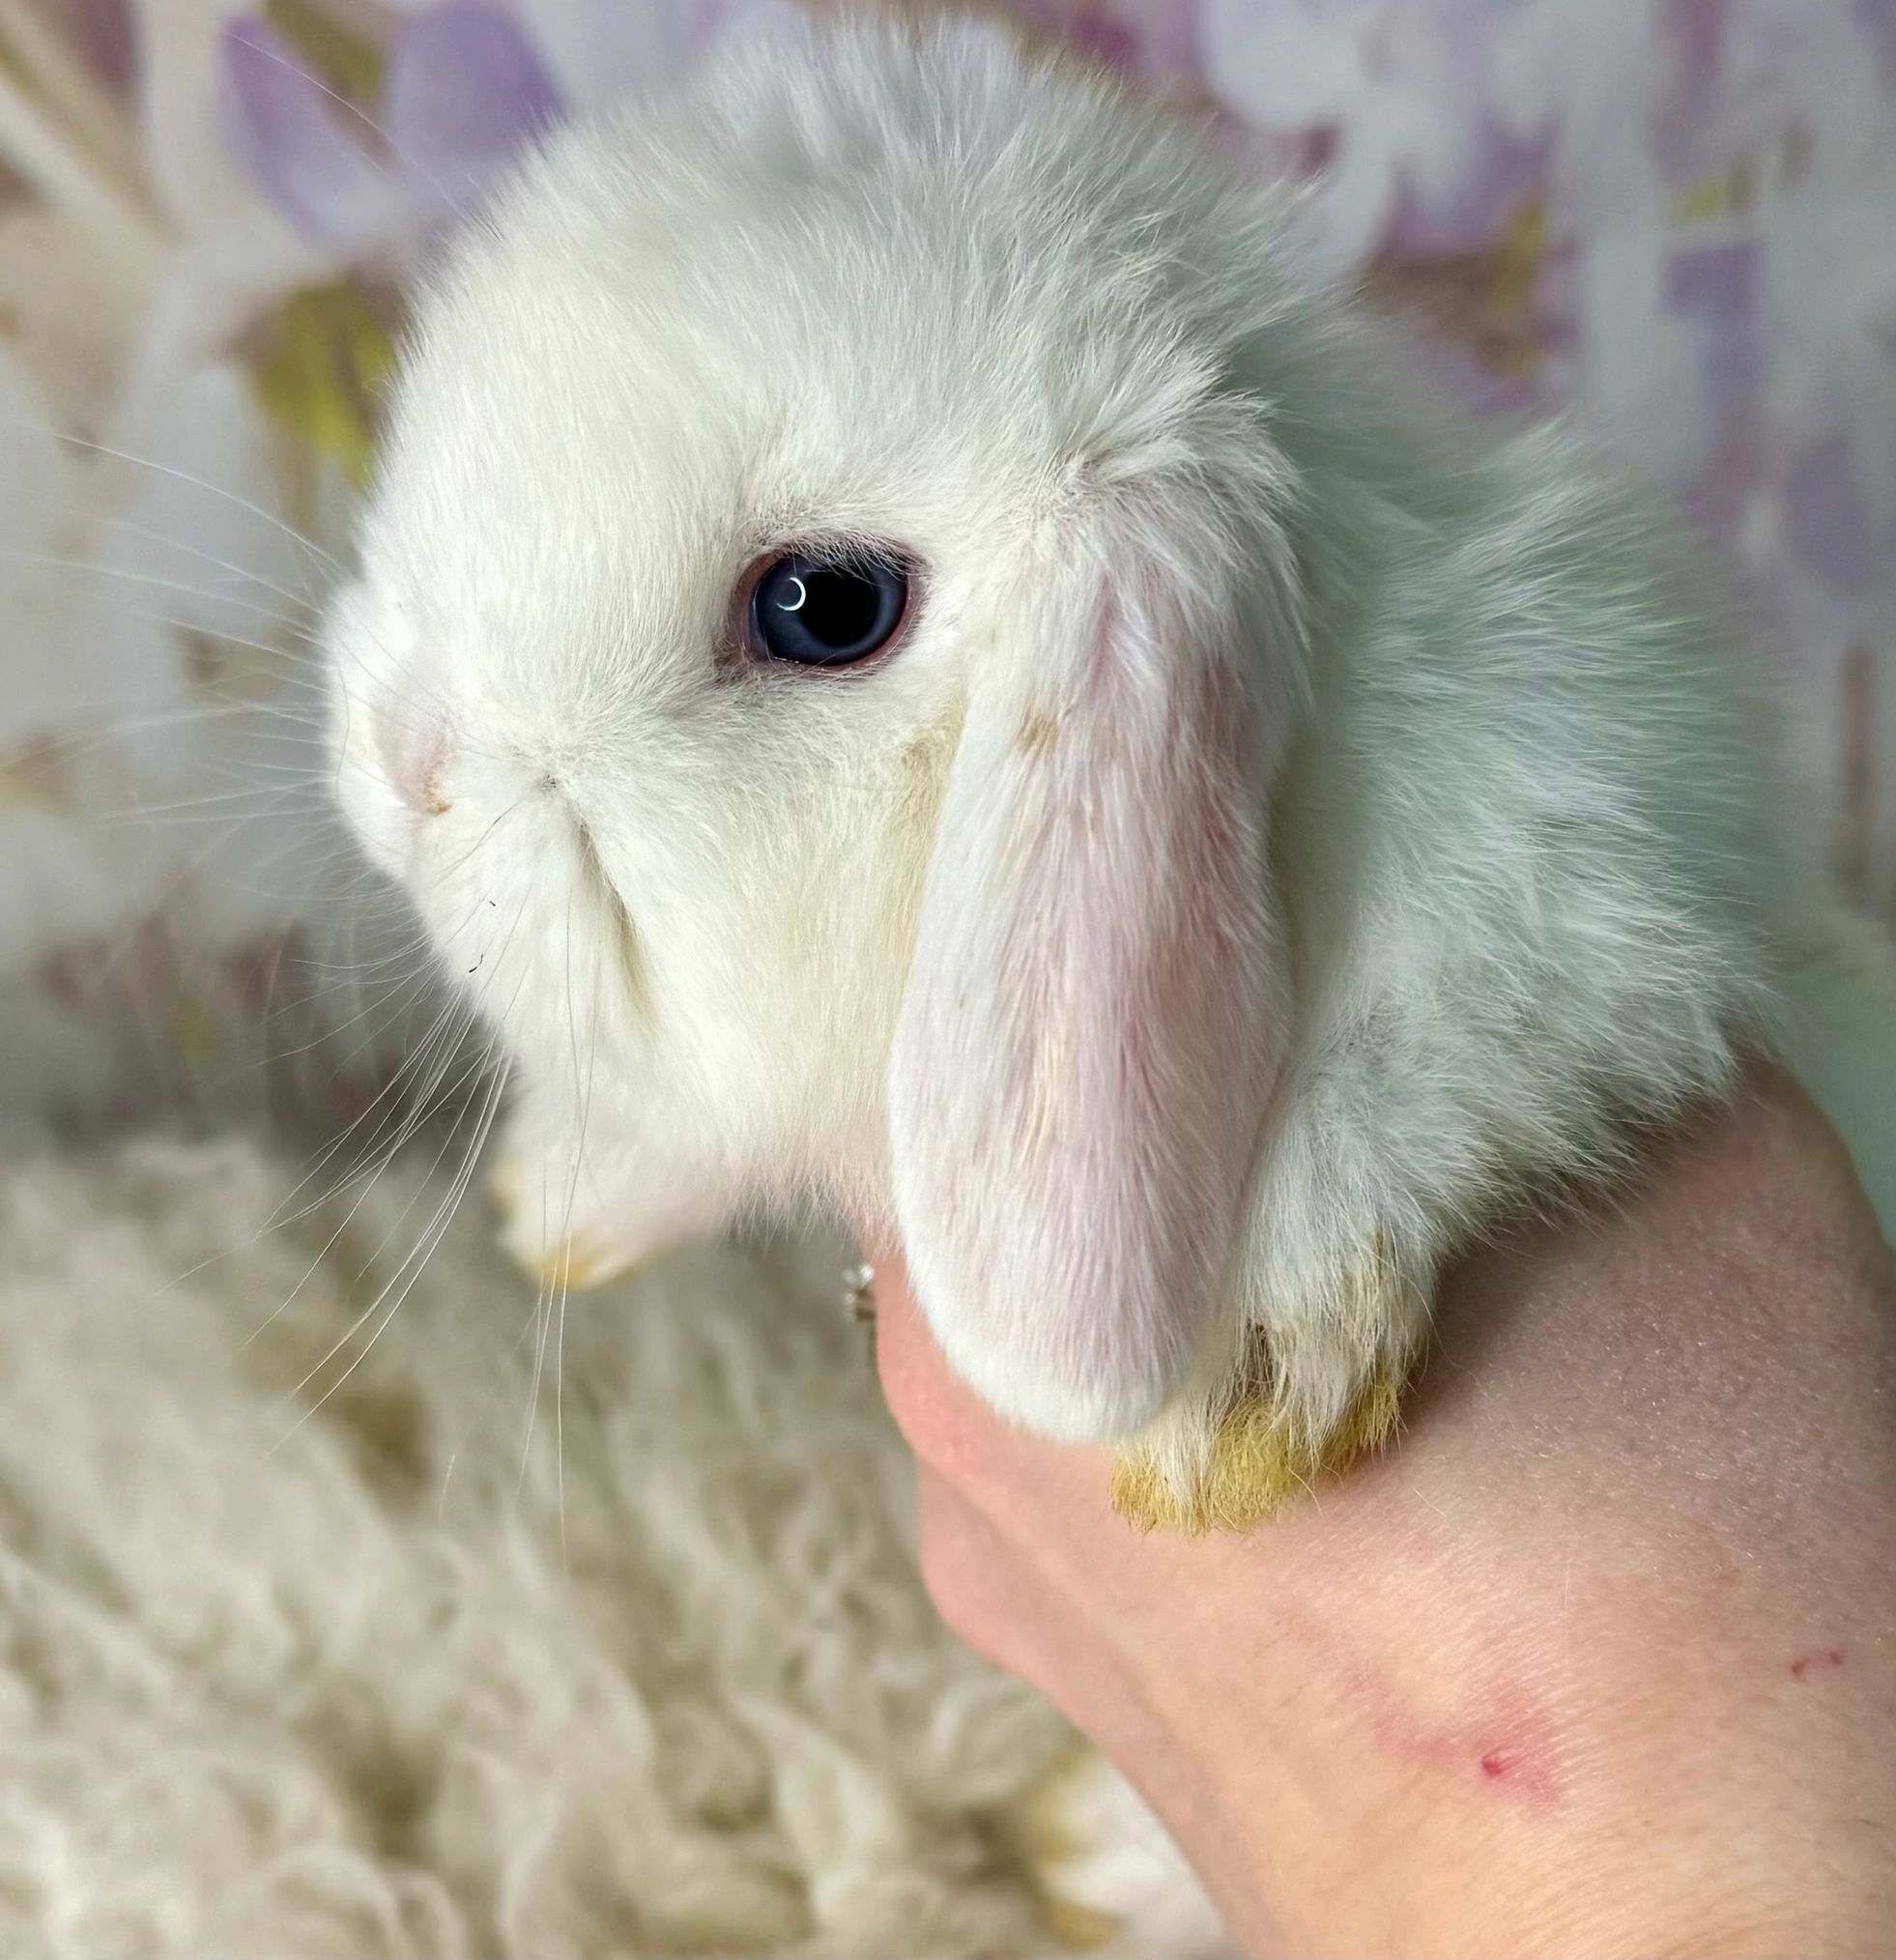 What Beautiful Blue Eyes You Have, Bunny! — The Daily Bunny